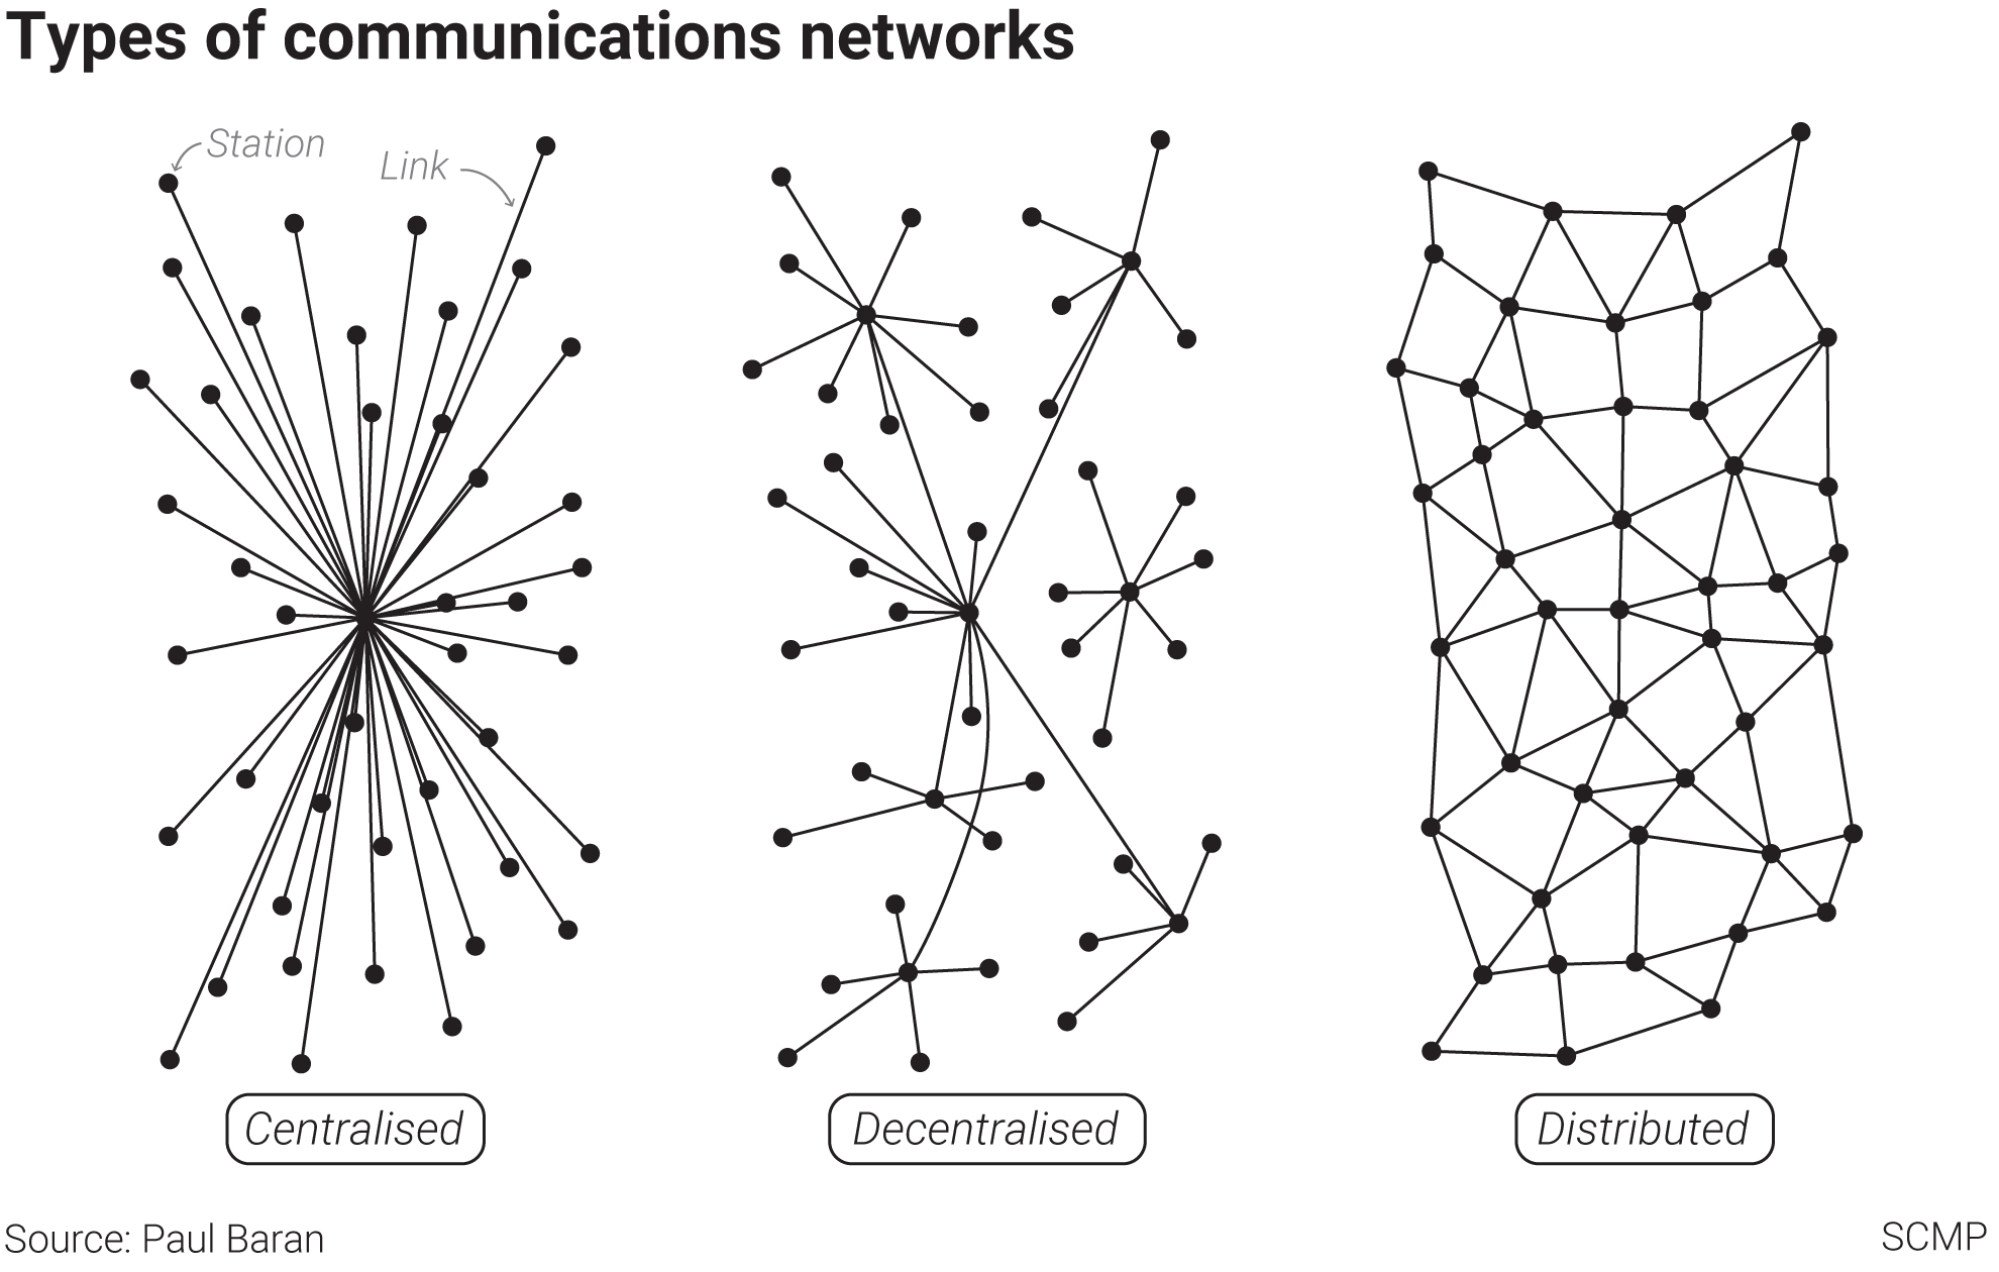 In a 1964 paper, researcher Paul Baran described three different types of networks made up of ‘stations’ and ‘links’: centralised, decentralised and distributed. Today, Web3 networks look more decentralised, with large servers handling the bulk of traffic, rather than content being equally distributed among users. Illustration: SCMP